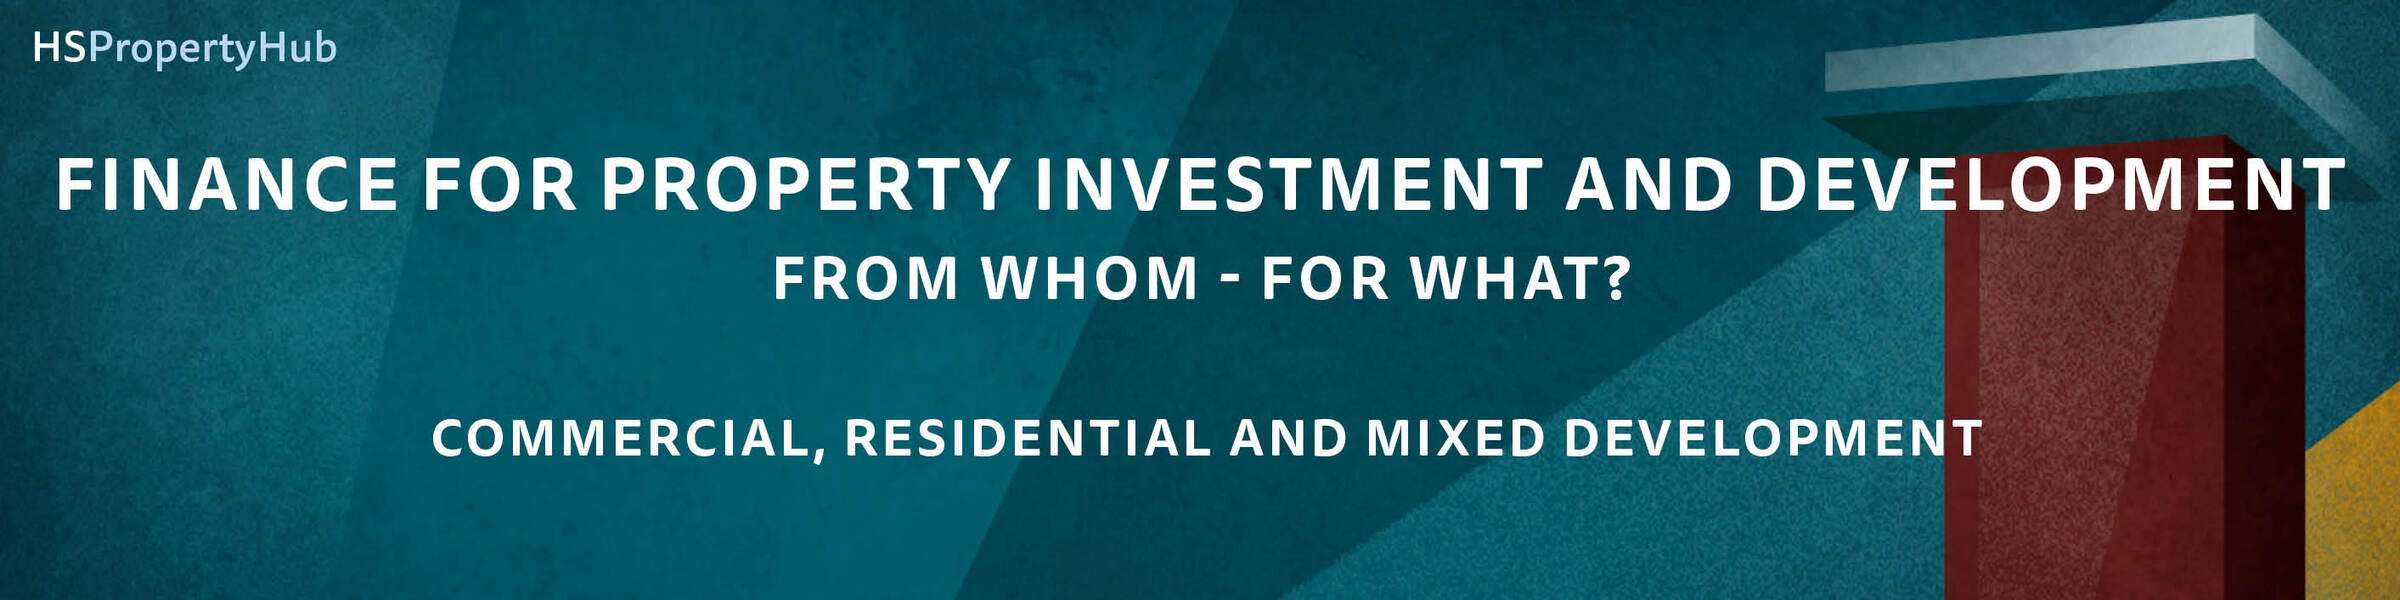 Finance for Property Investment and Development - From Whom - For What? Commercial, Residential and Mixed Development